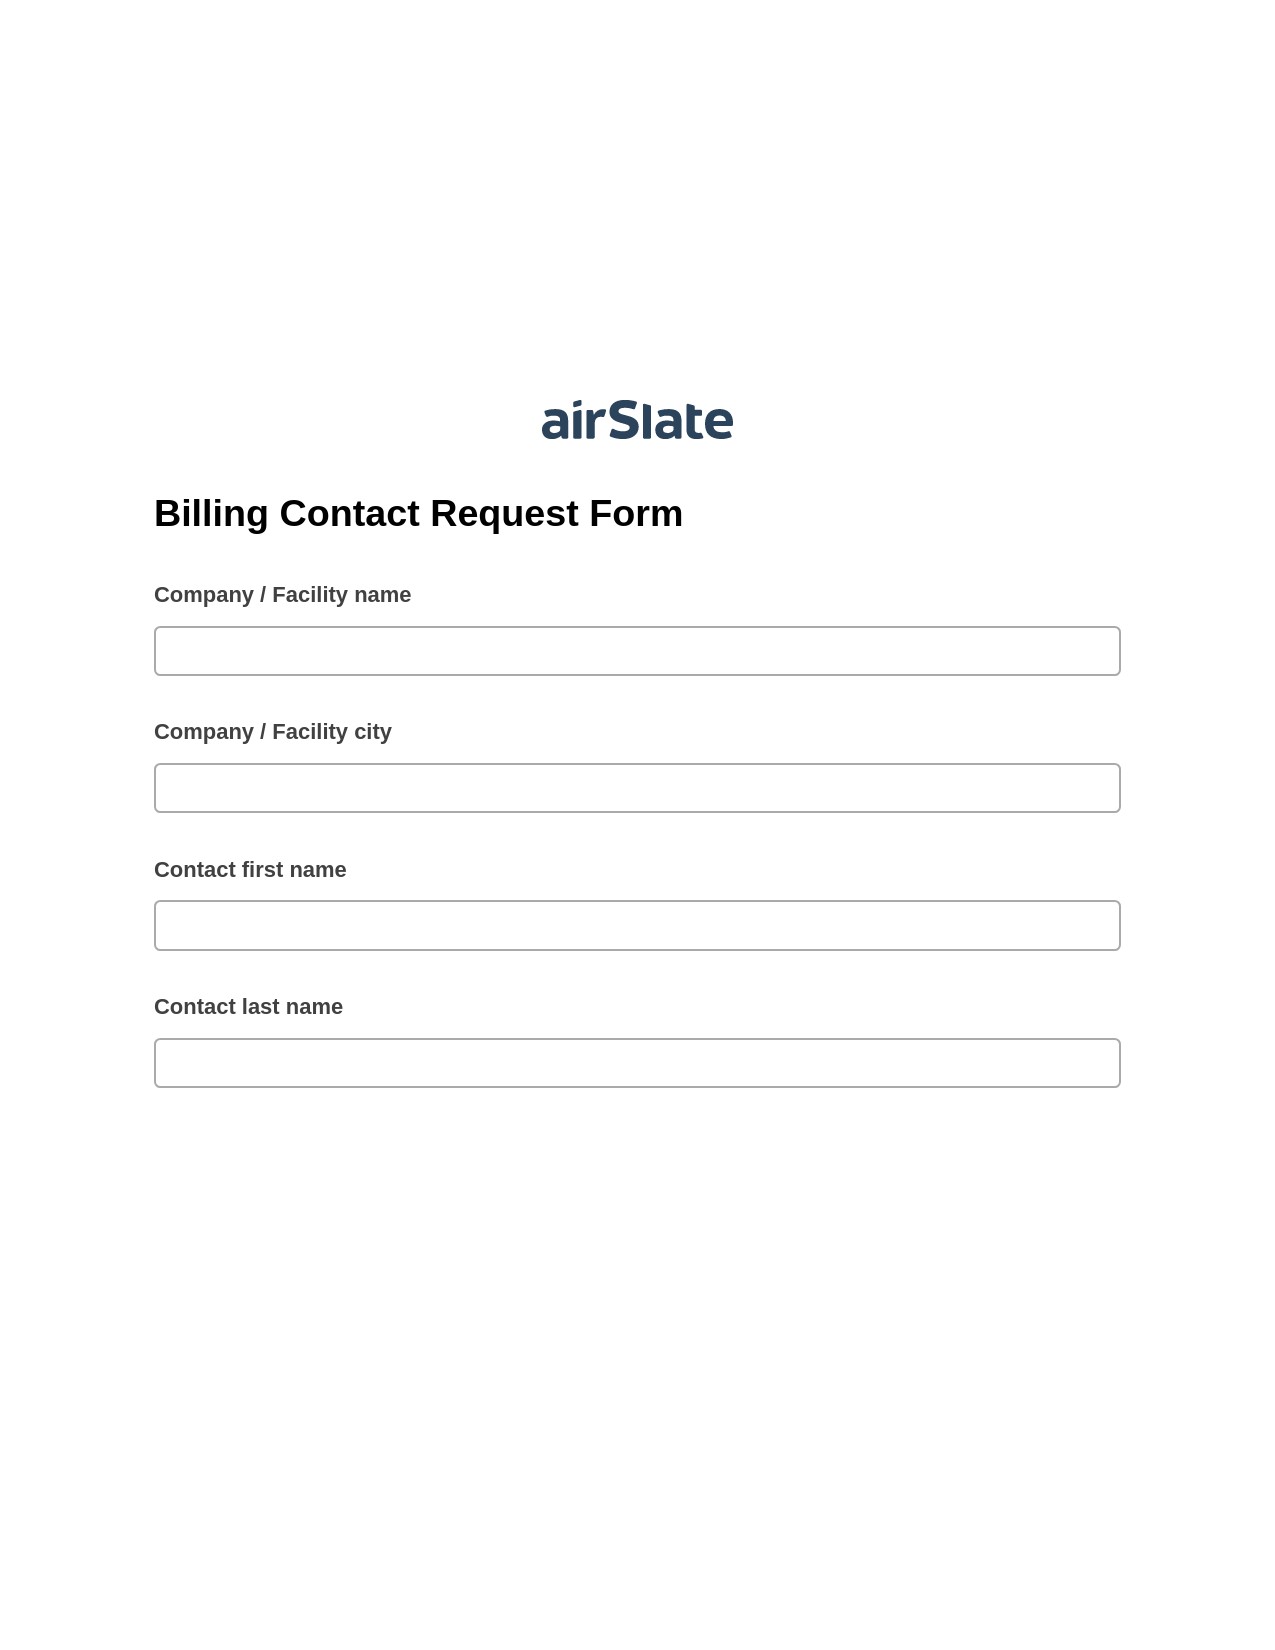 Billing Contact Request Form Pre-fill from Salesforce Records with SOQL Bot, SendGrid send Campaign bot, Export to Smartsheet